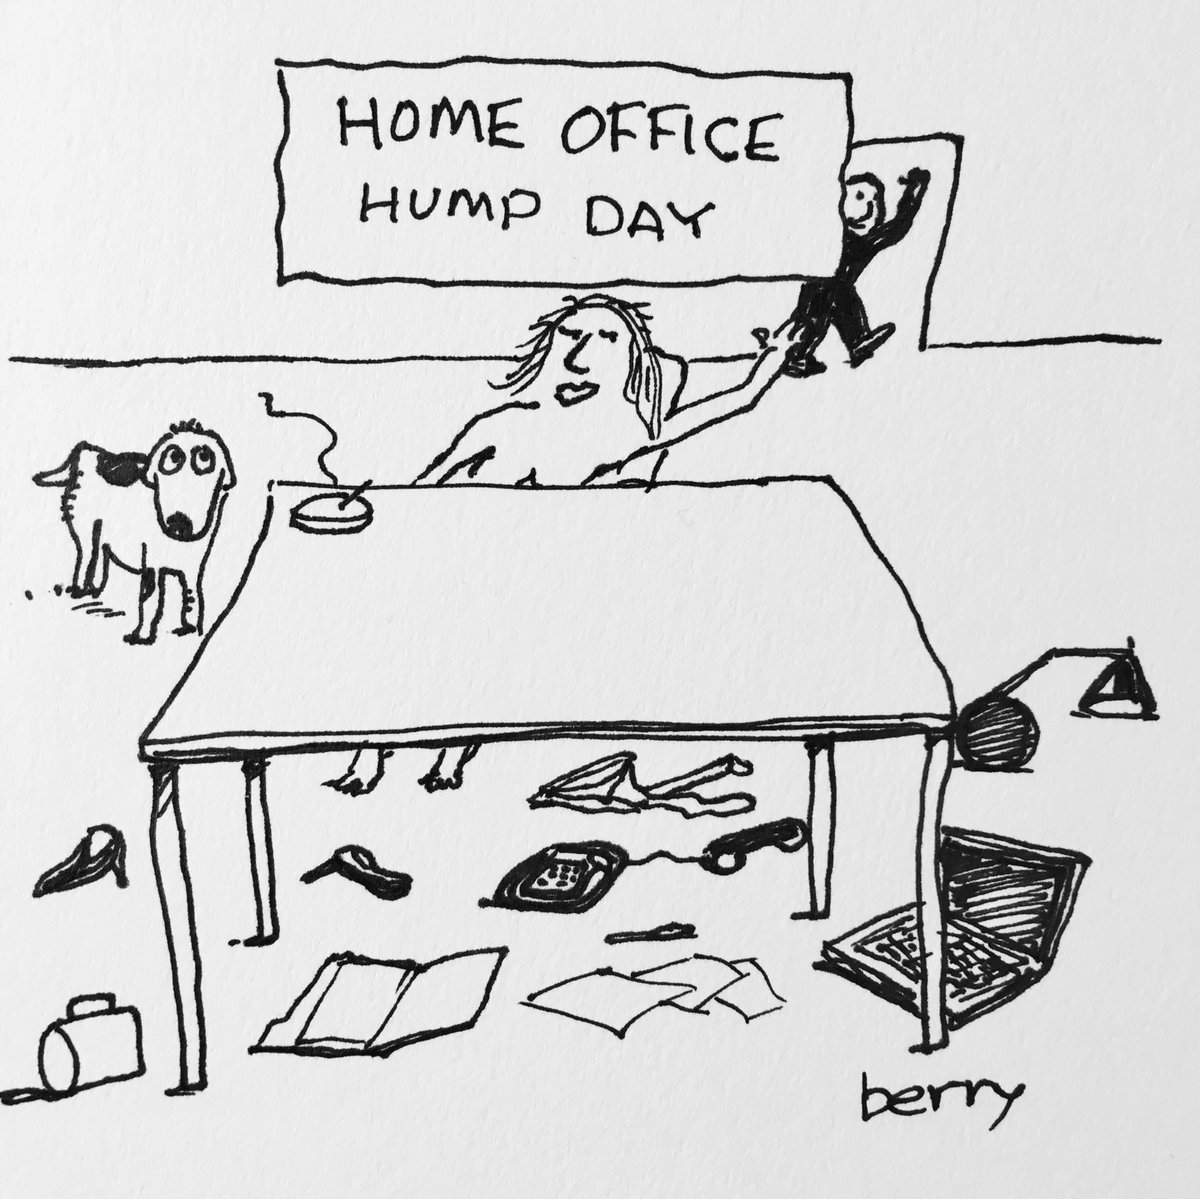 #happy #homeoffice #humpday #consensual #deskclearing